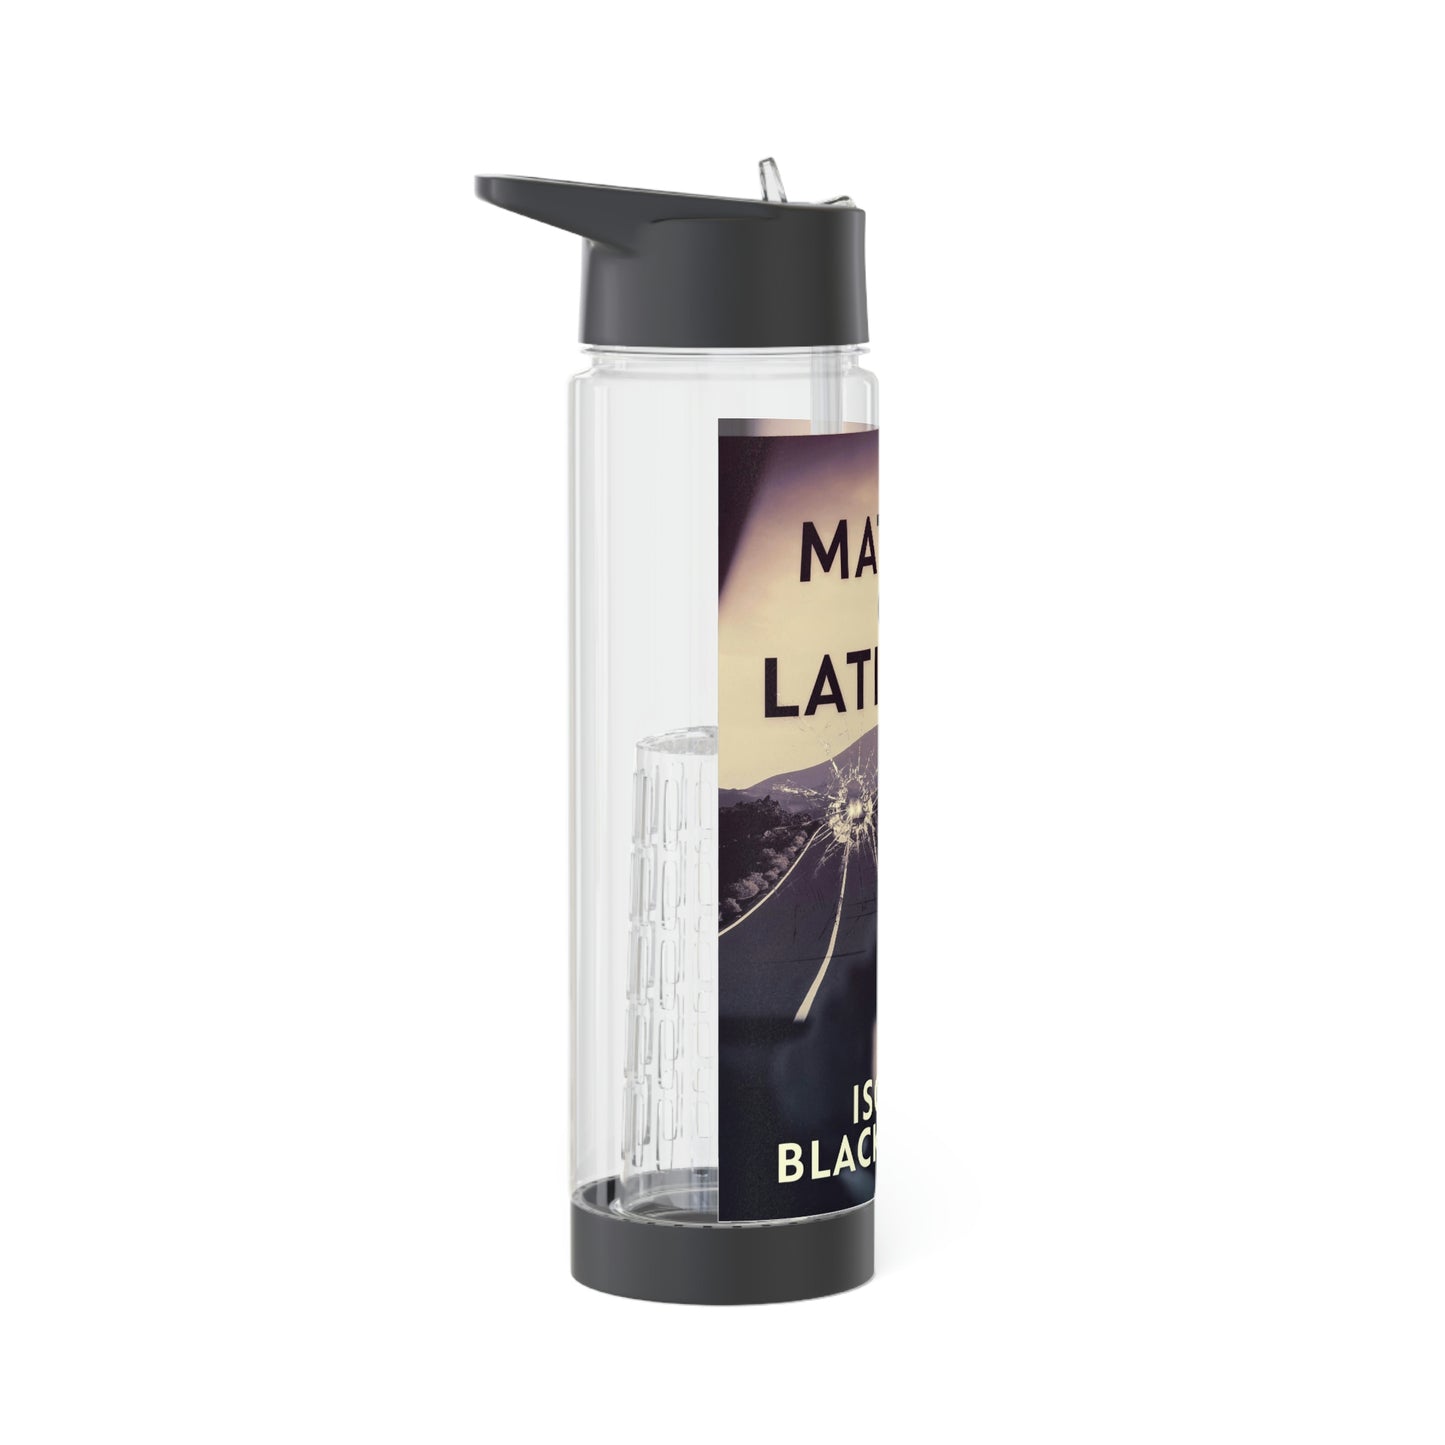 A Matter of Latitude - Infuser Water Bottle